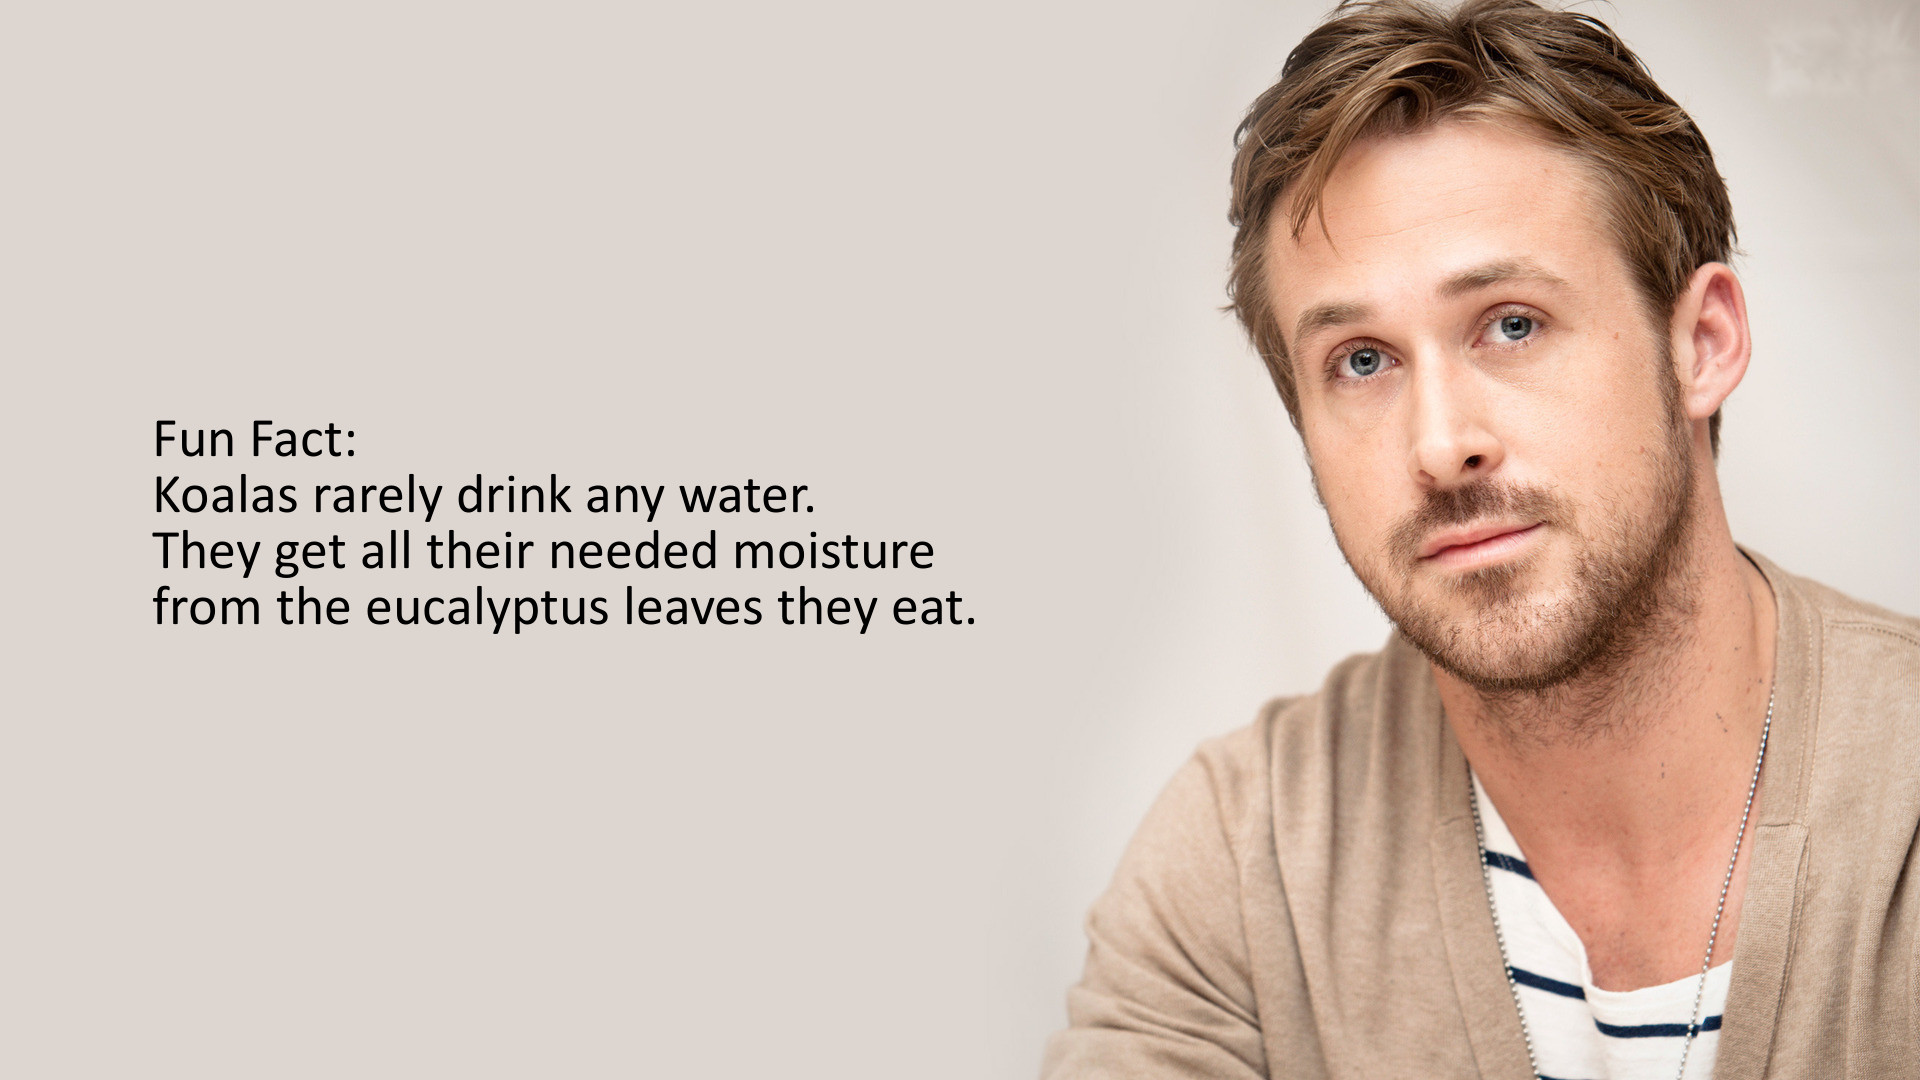 ryan gosling teacher memes - Fun Fact Koalas rarely drink any water. They get all their needed moisture from the eucalyptus leaves they eat.